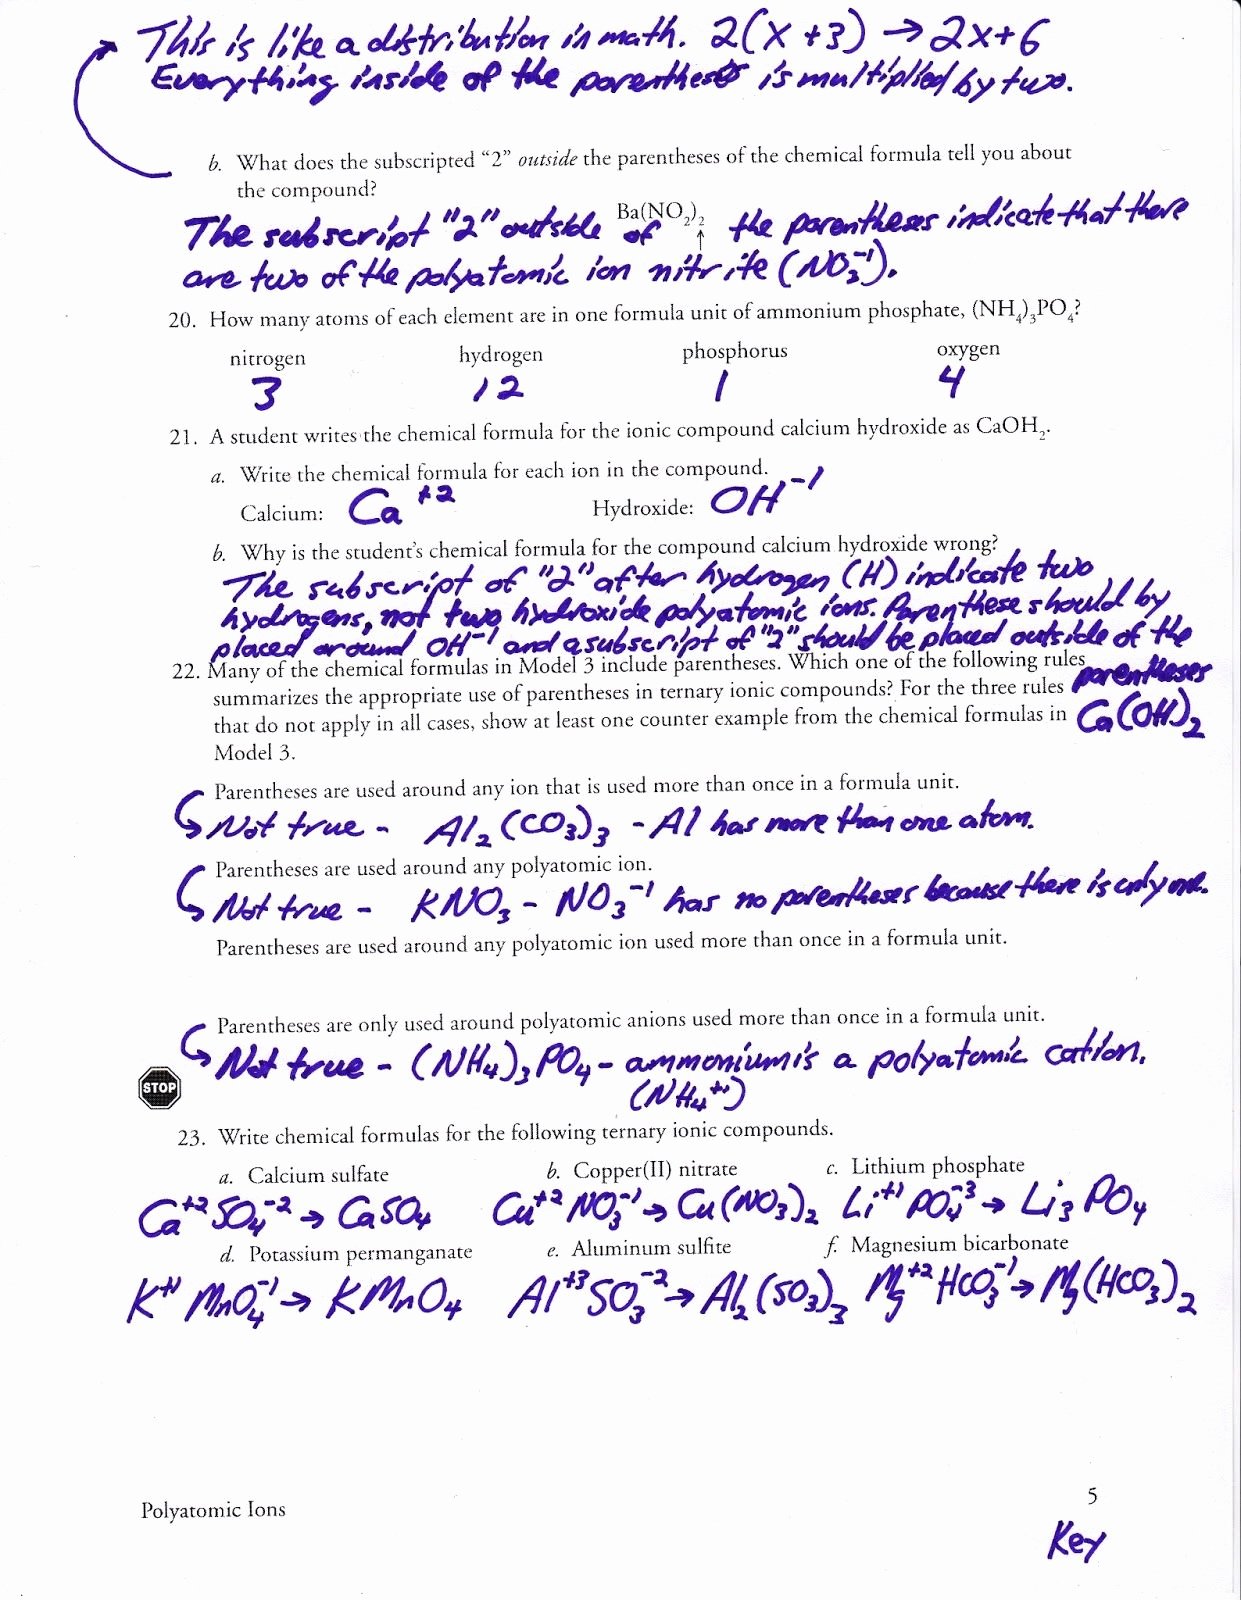 Polyatomic Ions Worksheet Answers Lovely Polyatomic Ions Worksheet Answer Key